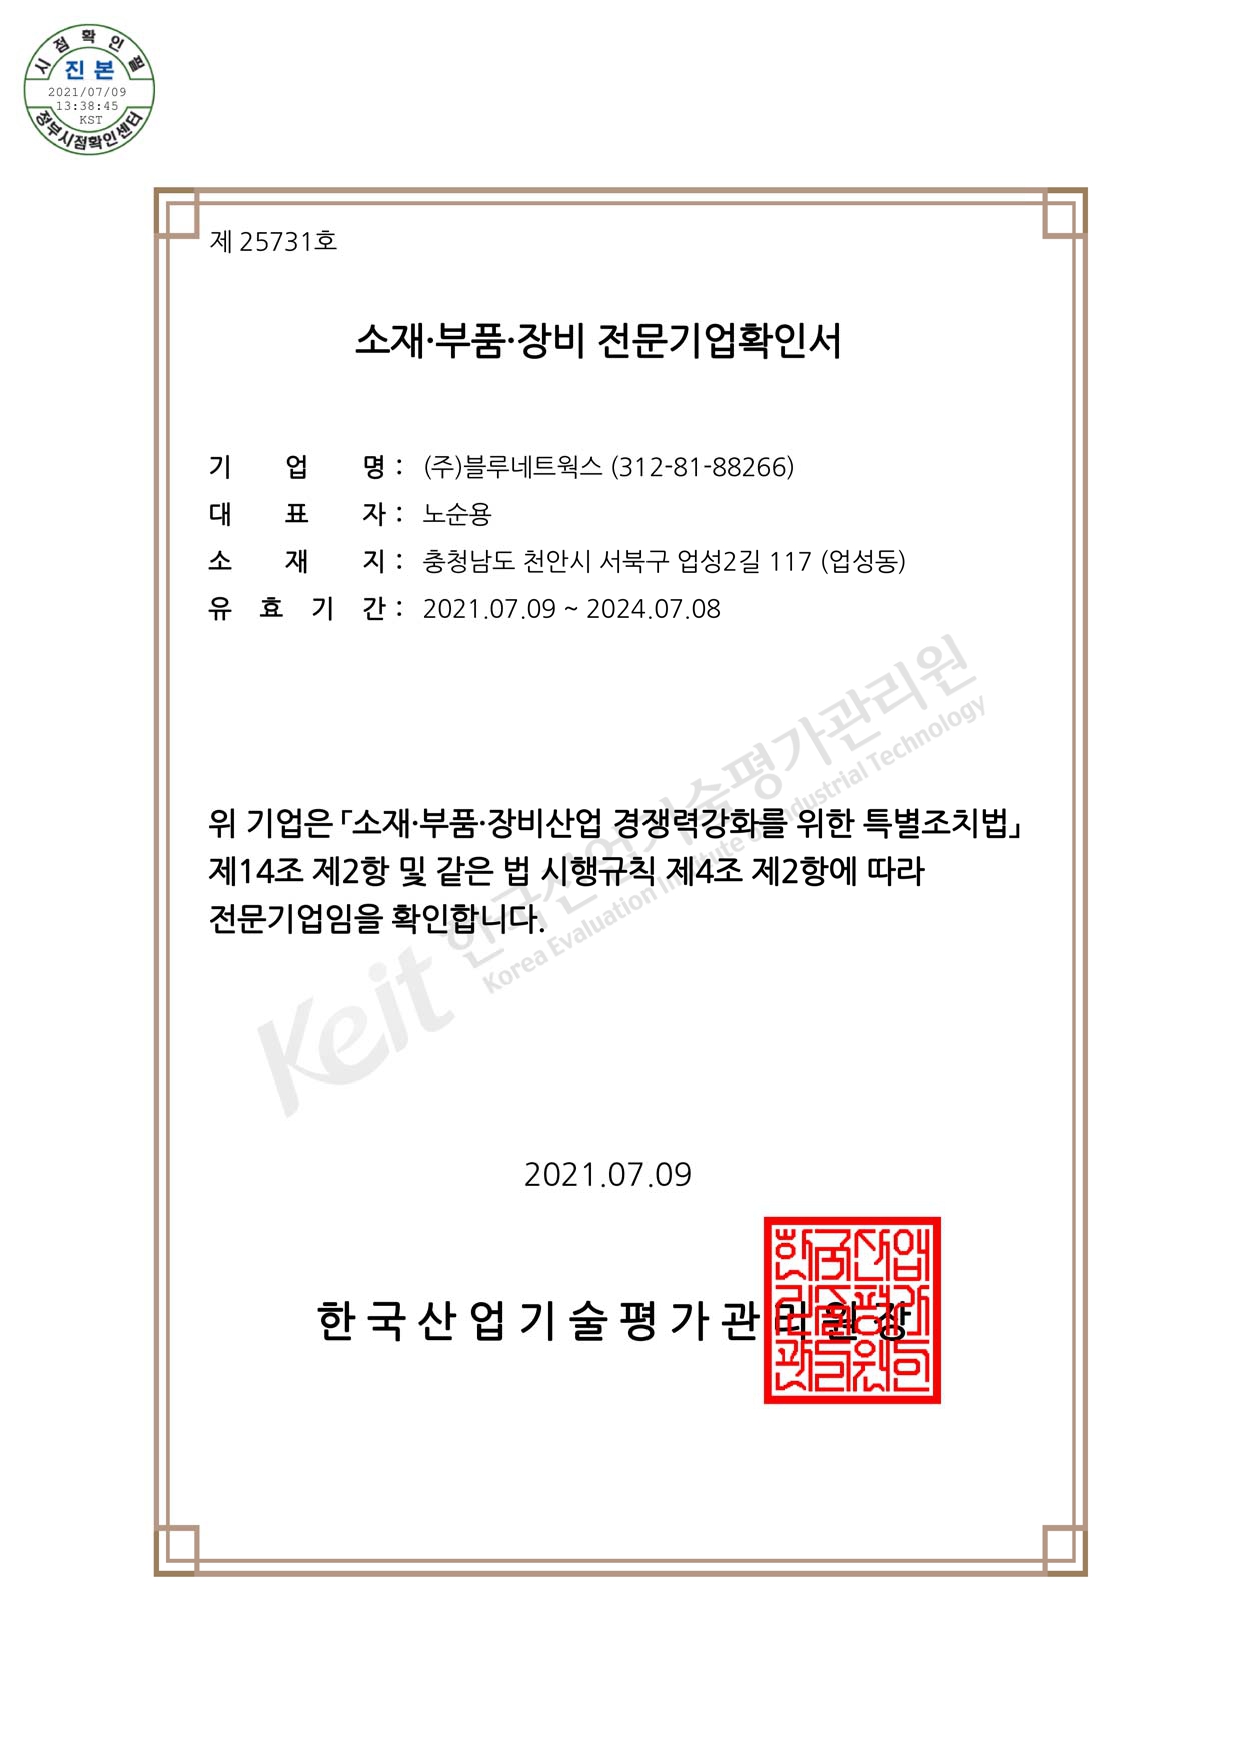 Confirmation of a company specializing in material and parts equipment (~24.07.08)_Blue Networks [첨부 이미지1]